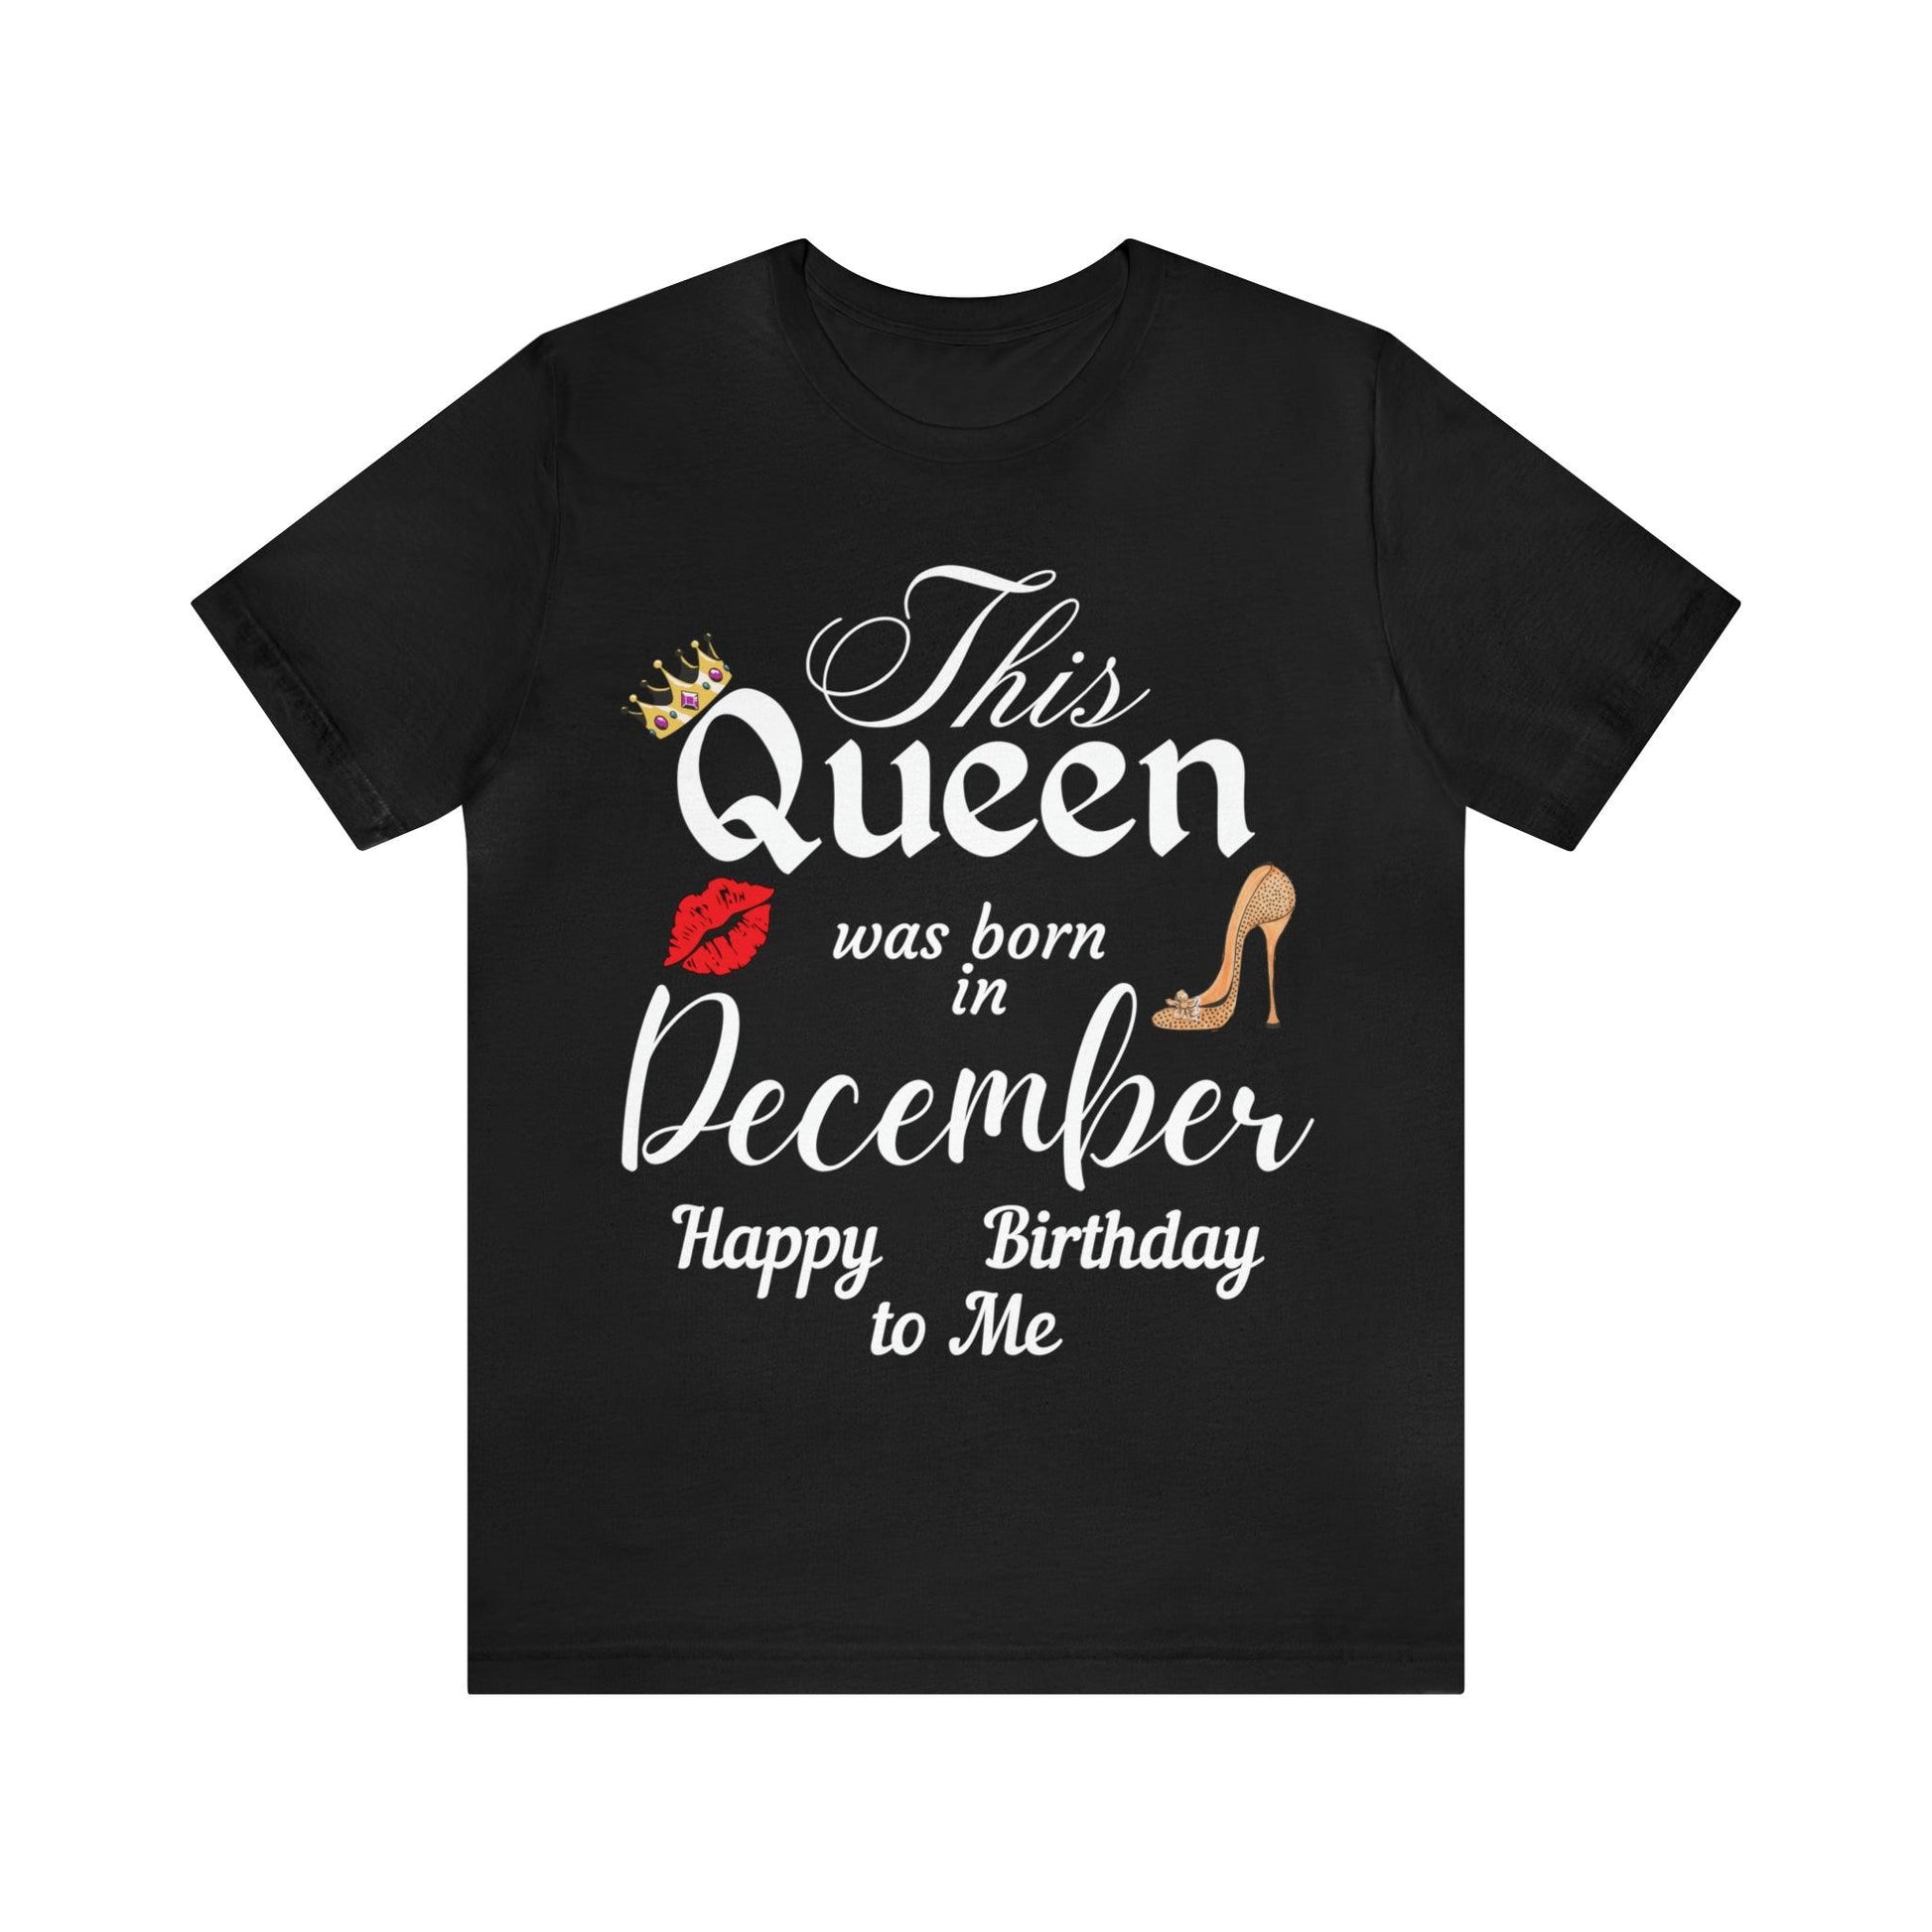 Birthday Queen Shirt, Gift for Birthday, This Queen was born in December Shirt, Funny Queen Shirt, Funny Birthday Shirt, Birthday Gift - Giftsmojo